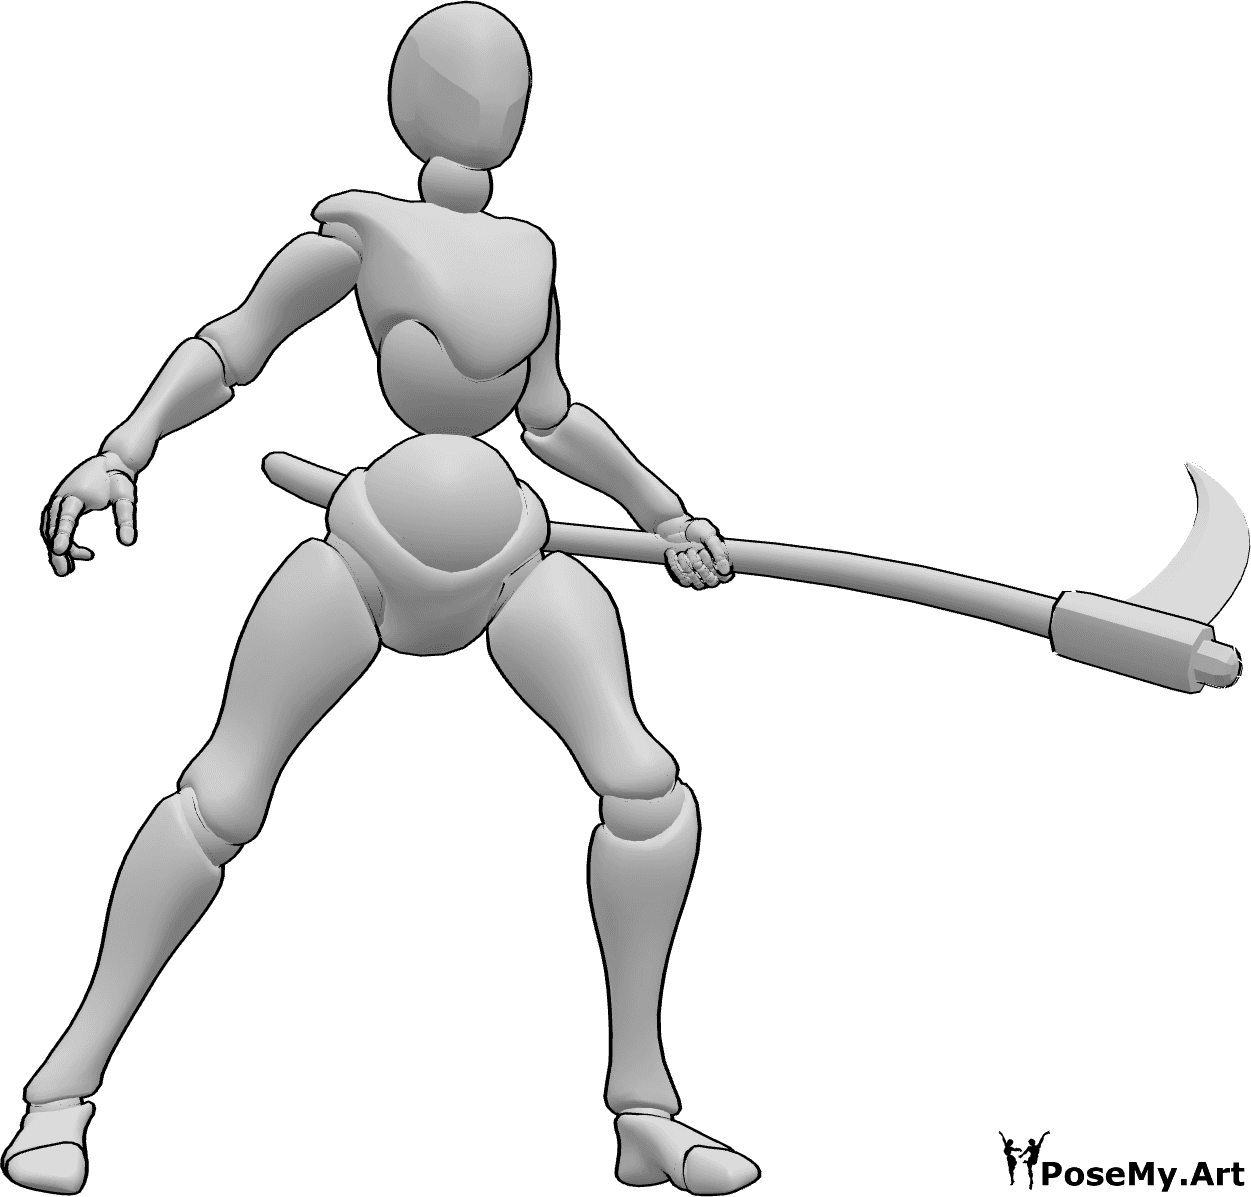 Pose Reference- Female fighter scythe pose - Female is standing with a scythe in her left hand, ready to fight